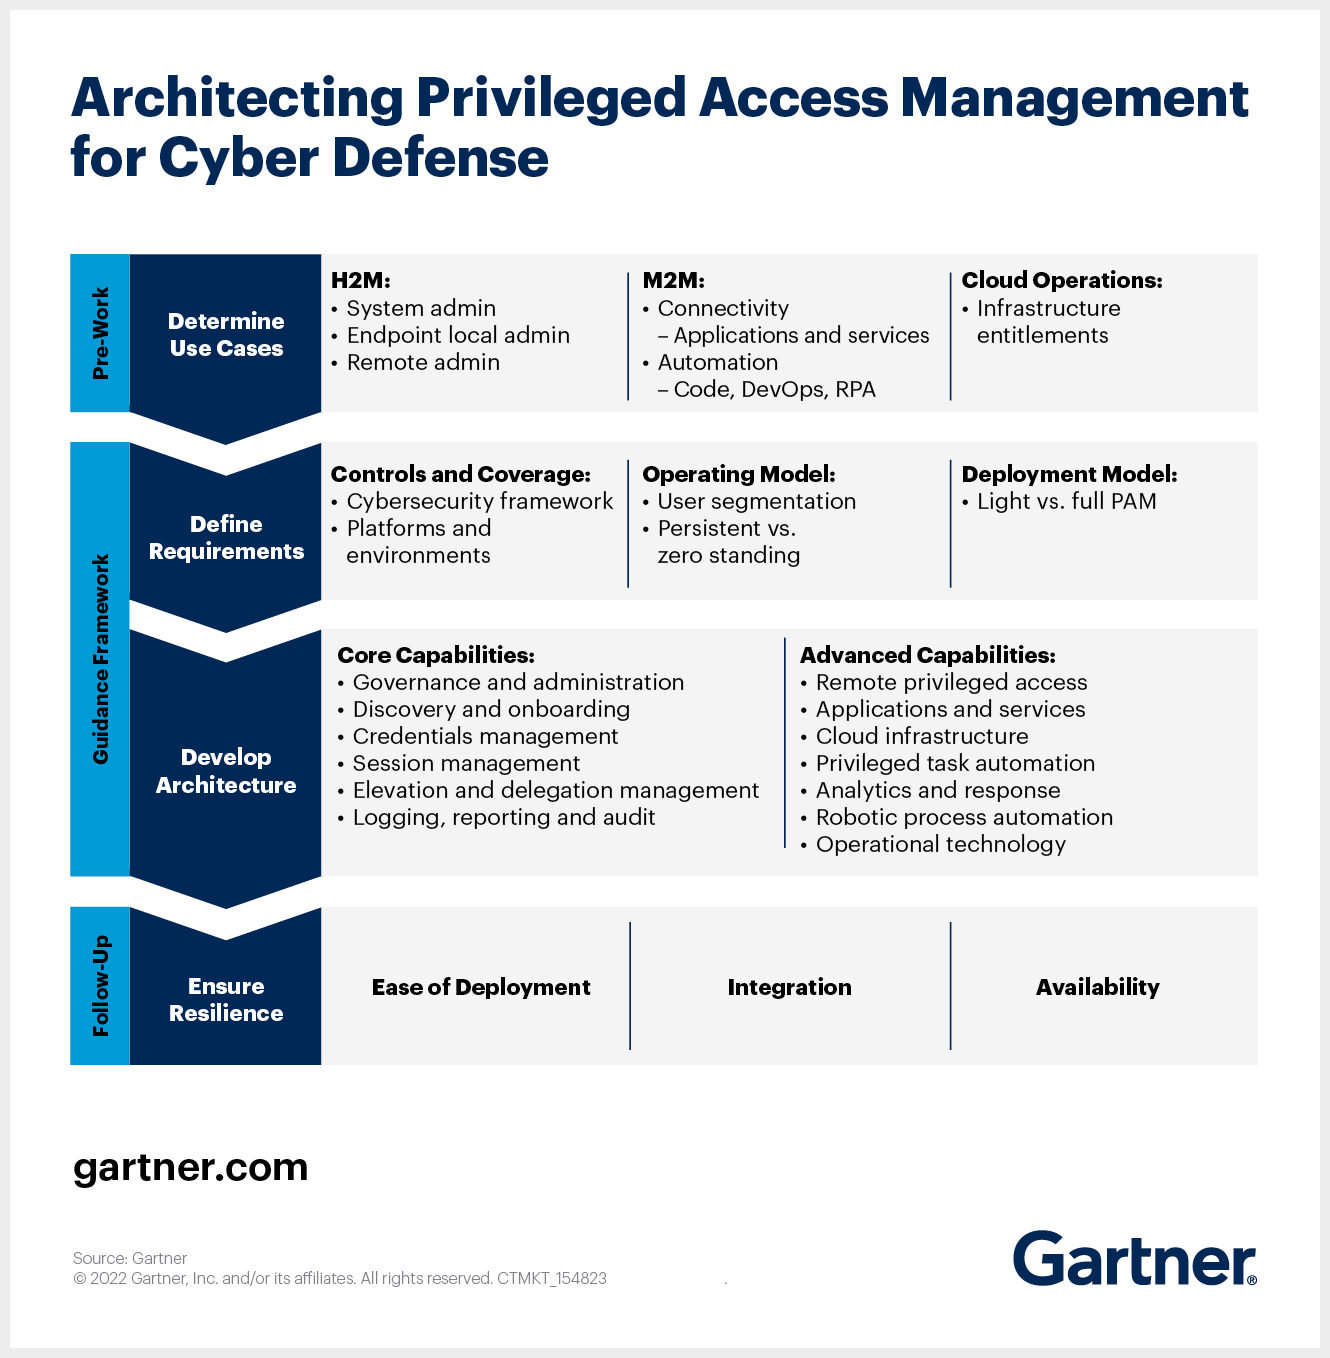 Architecting Privileged Access Management for Cyber Defense